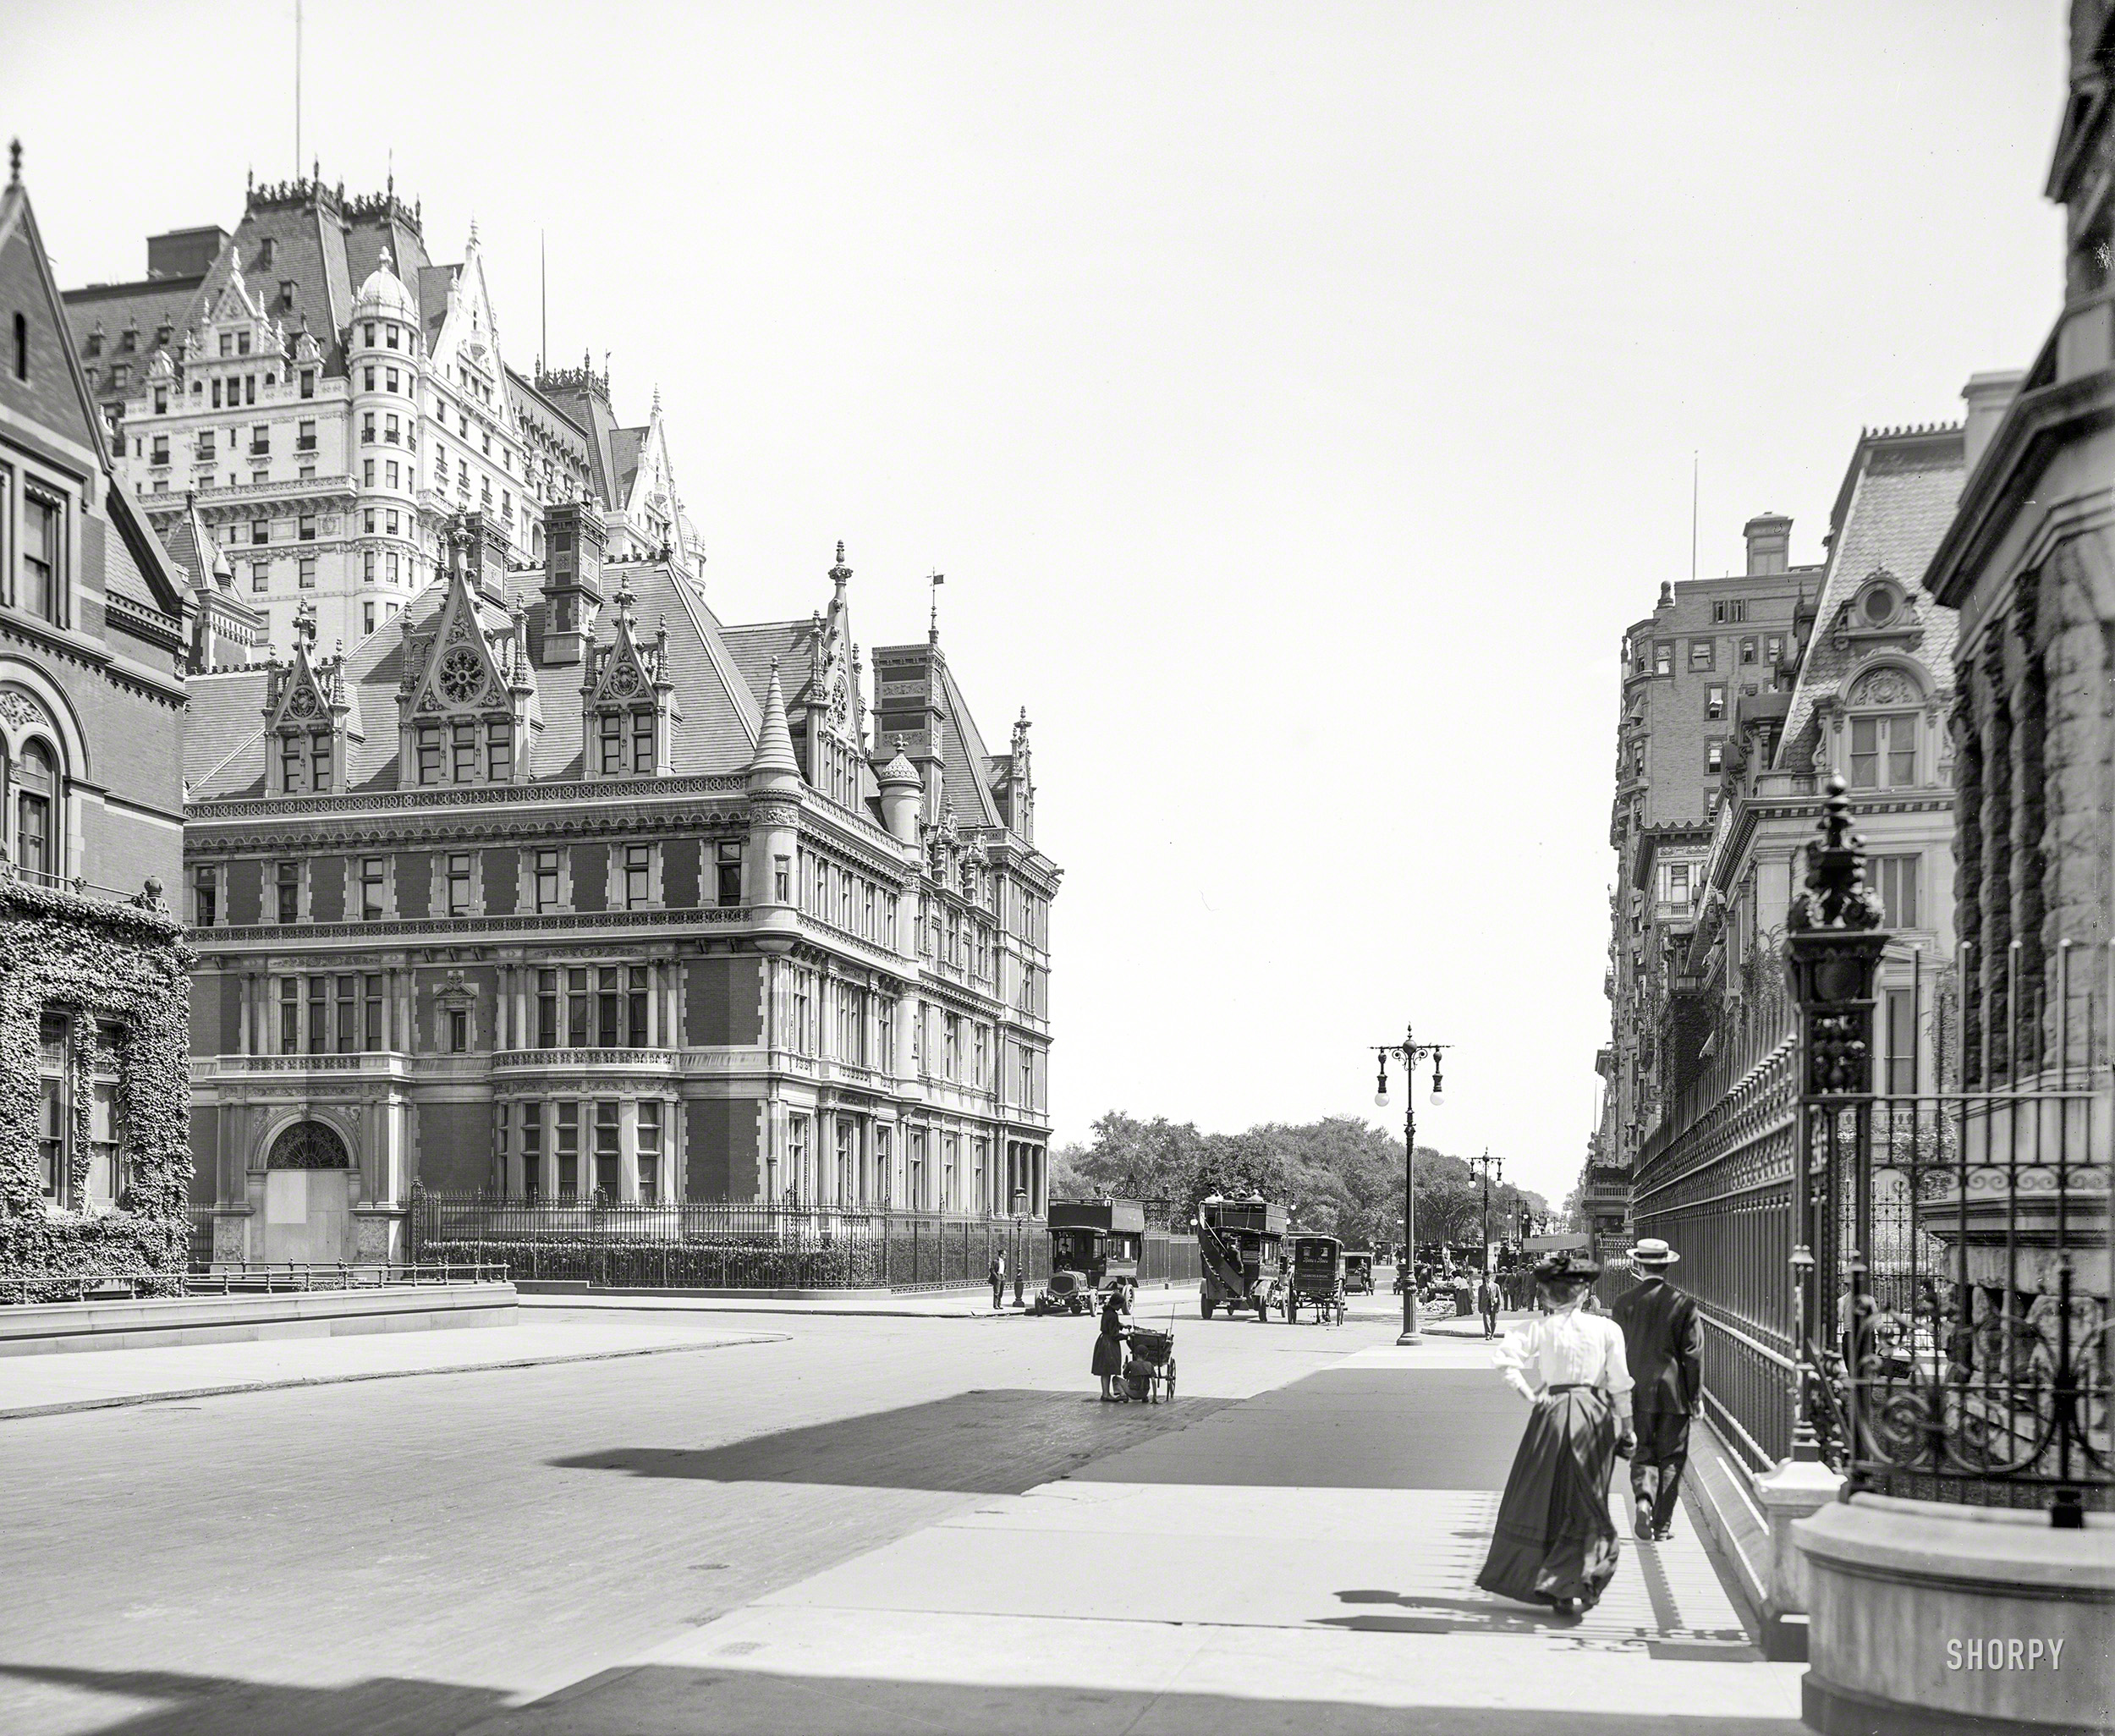 New York circa 1905. "Fifth Avenue at 57th Street, looking toward Vanderbilt House, Plaza Hotel and entrance to Central Park." 8x10 inch dry plate glass negative, Detroit Publishing Company. View full size.